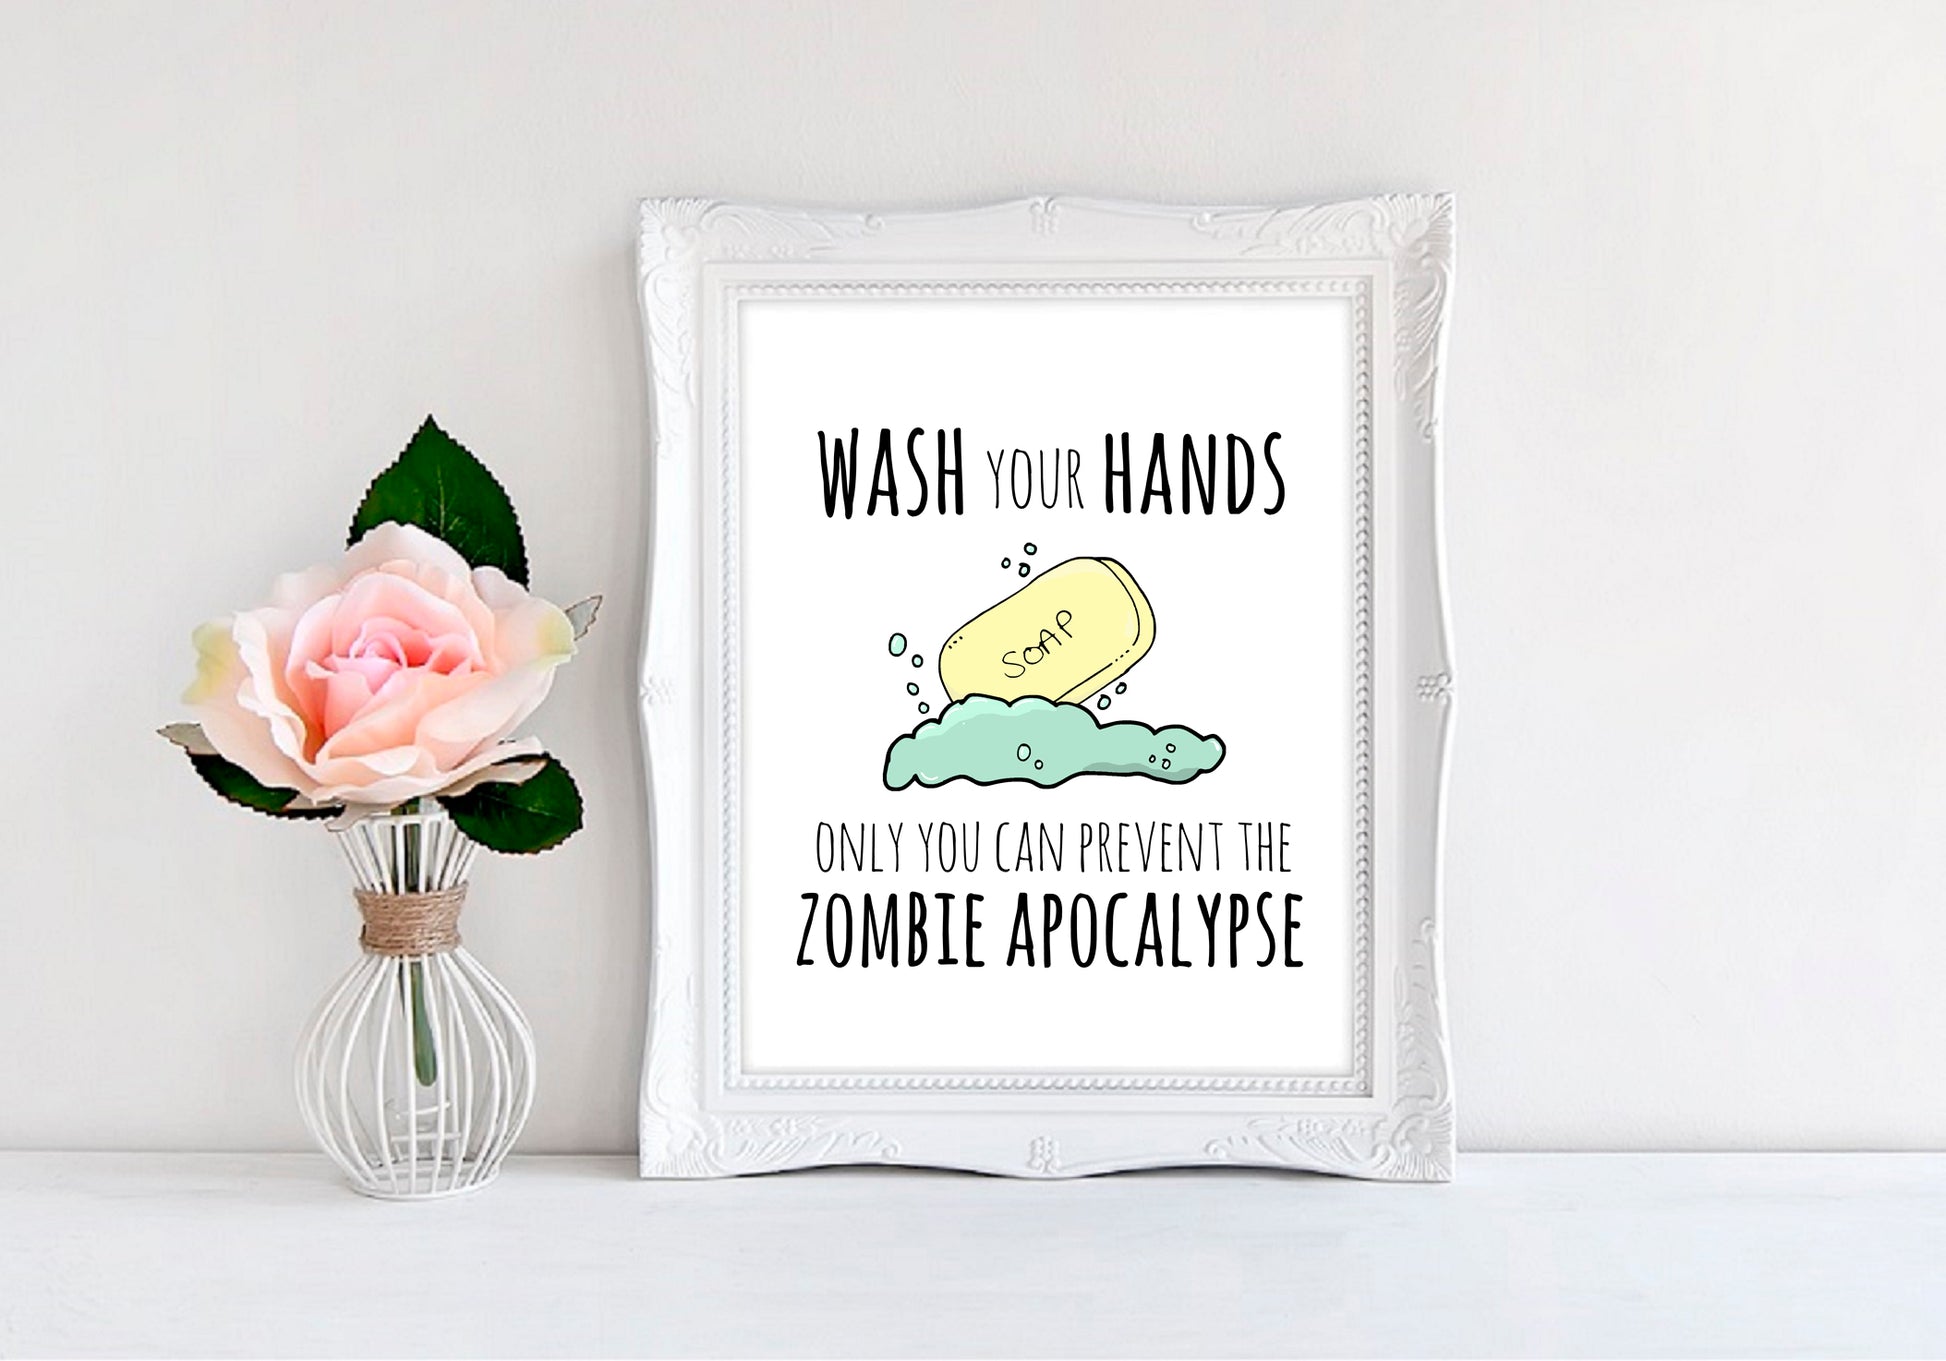 Wash Your Hands Only You Can Prevent The Zombie Apocalypse - 8"x10" Wall Print - MoonlightMakers